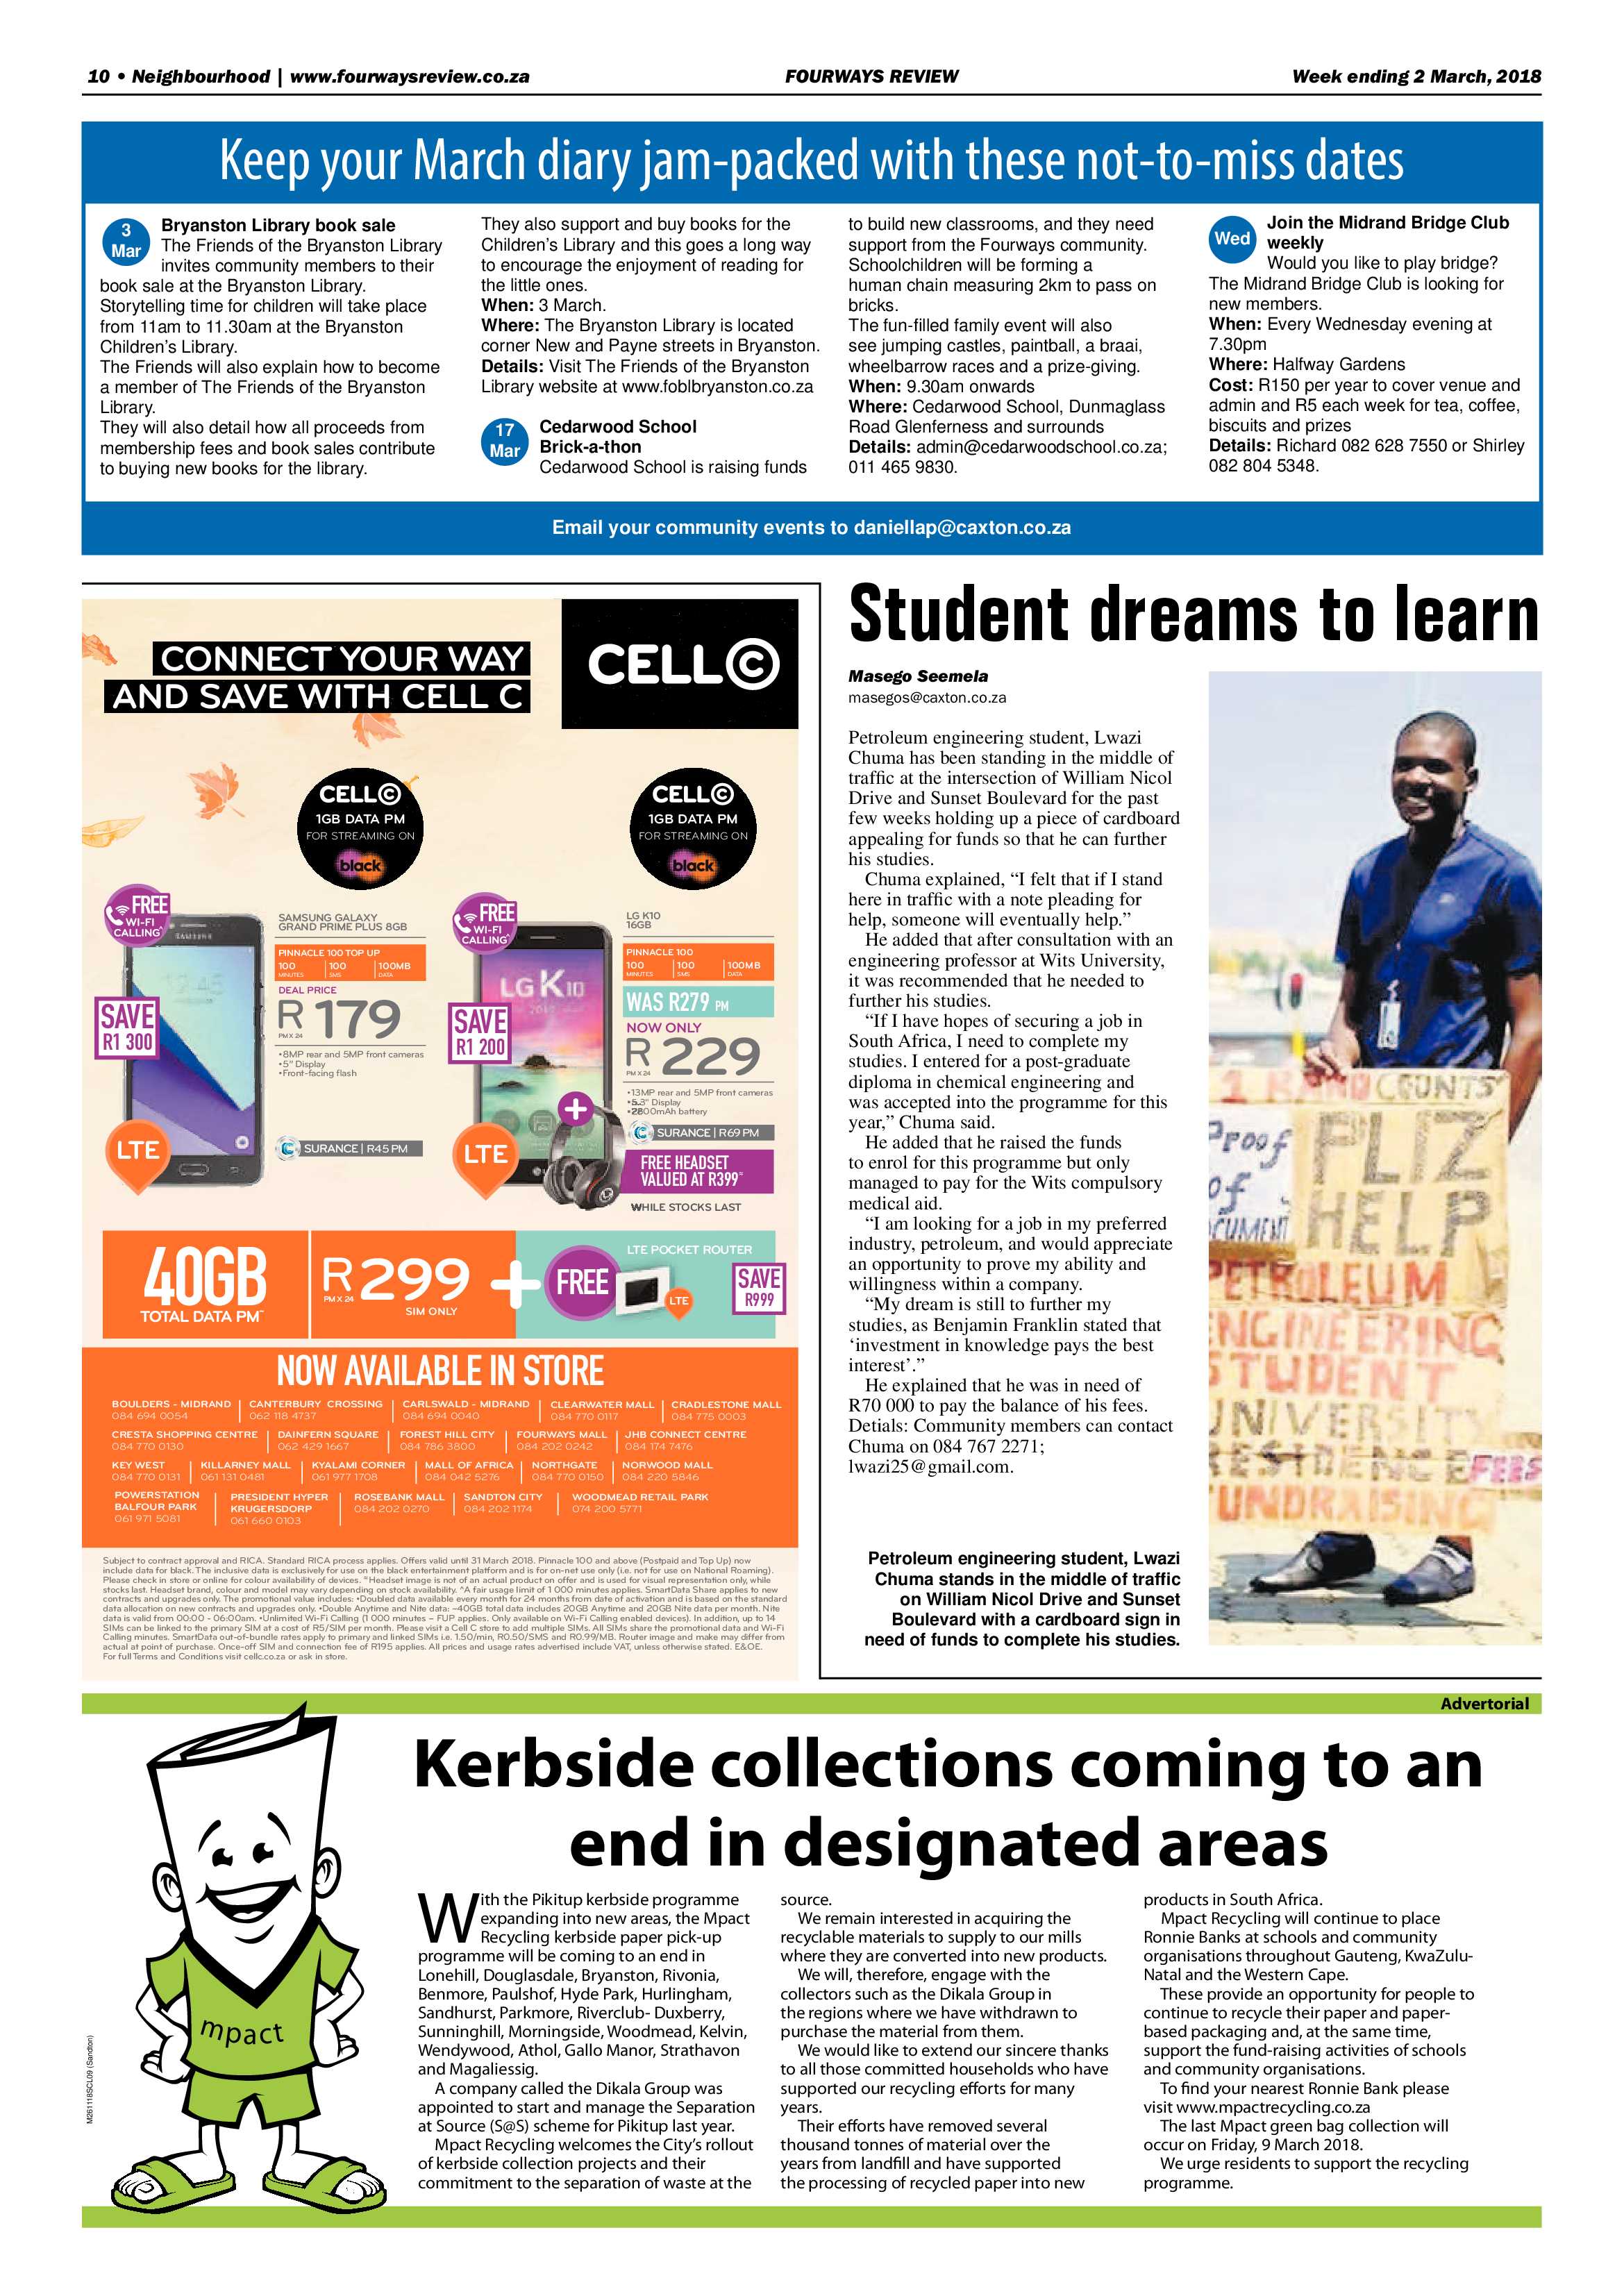 Fourways Review 3 March 2018 page 10